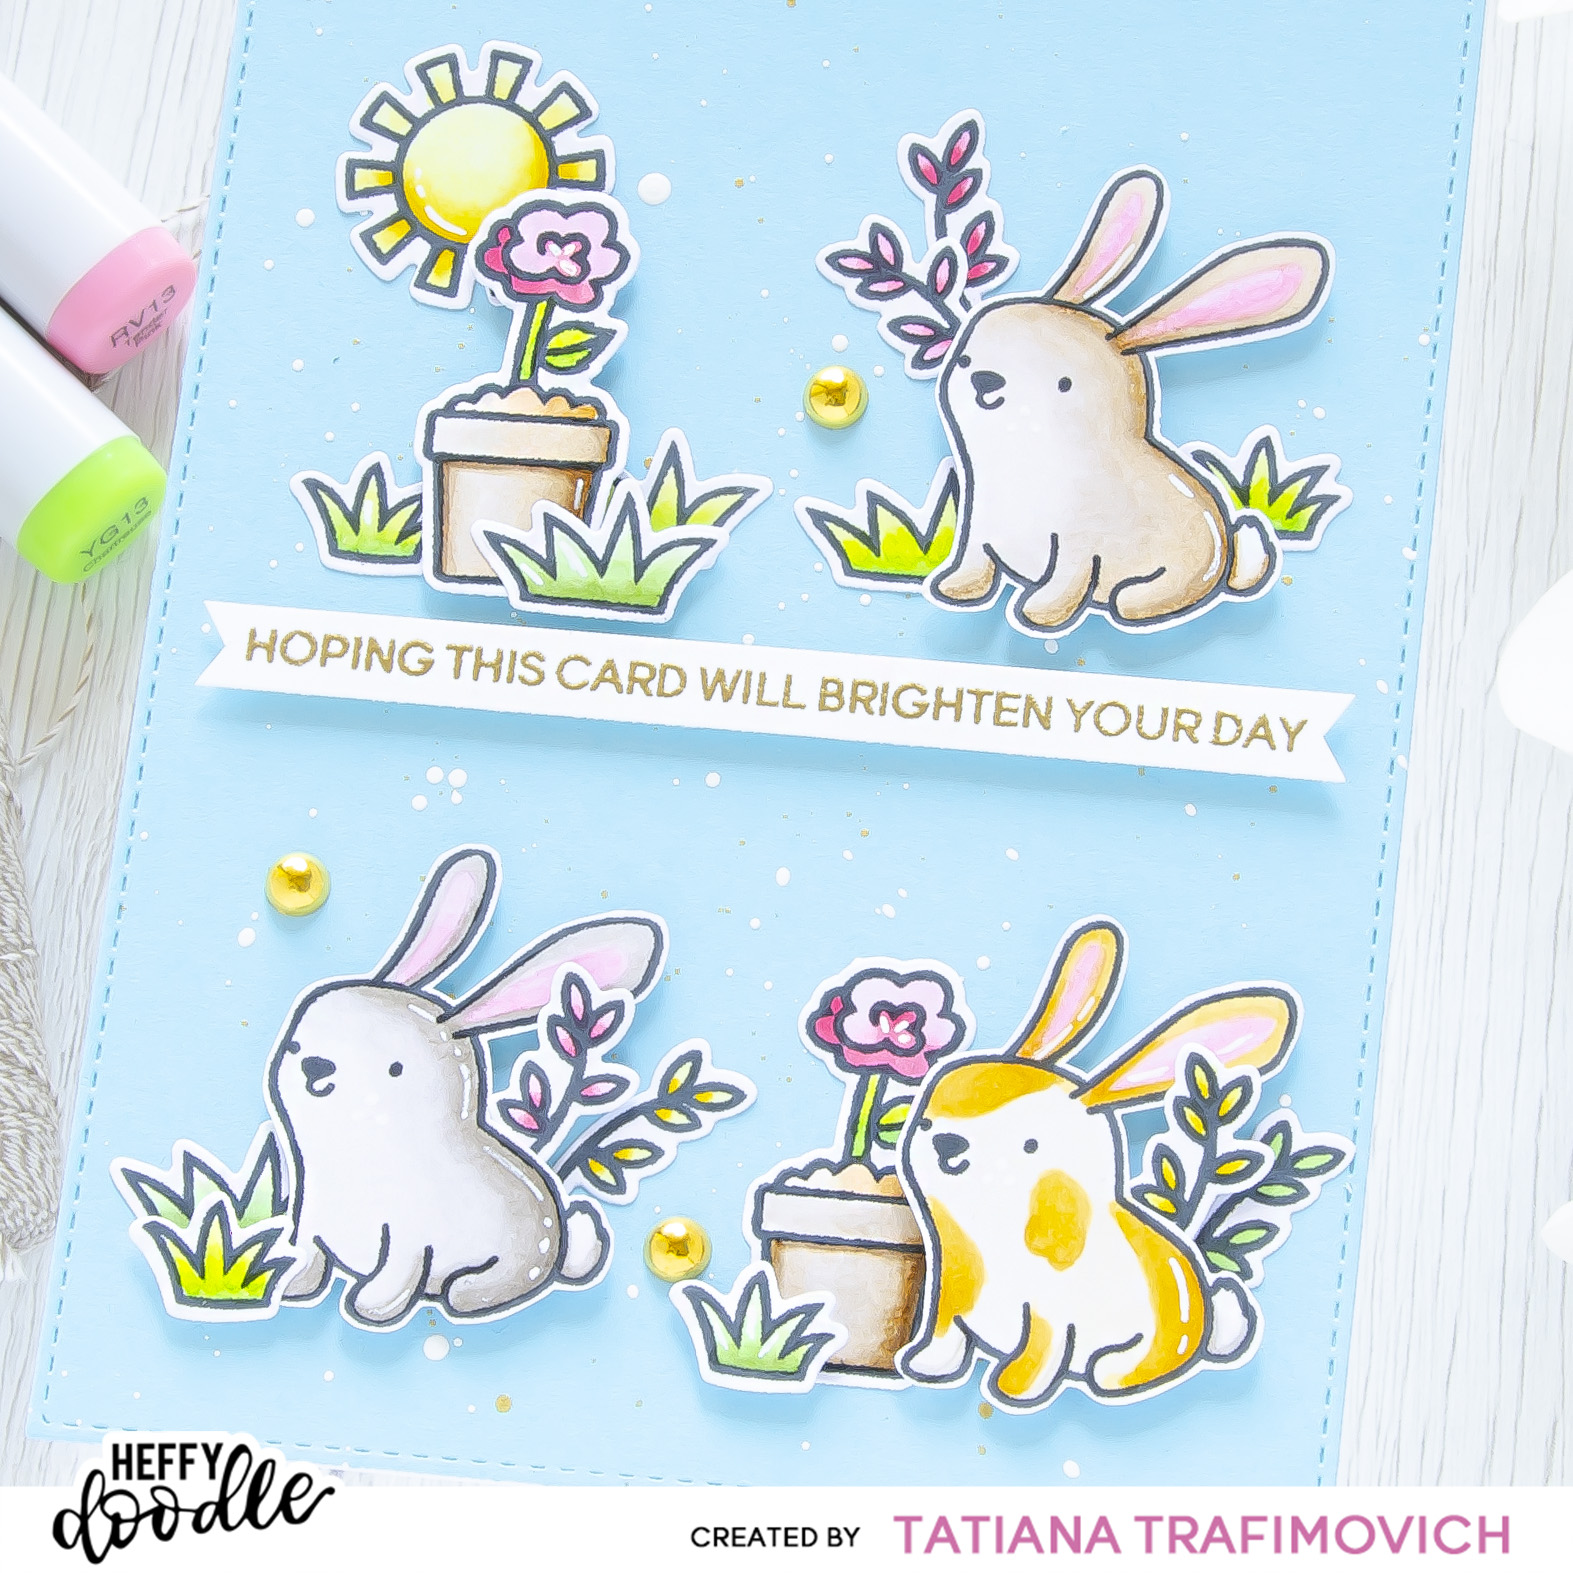 Hope This Card Will Brighten Your Day #handmade card by Tatiana Trafimovich #tatianacraftandart - stamps and dies by Heffy Doodle #heffydoodle